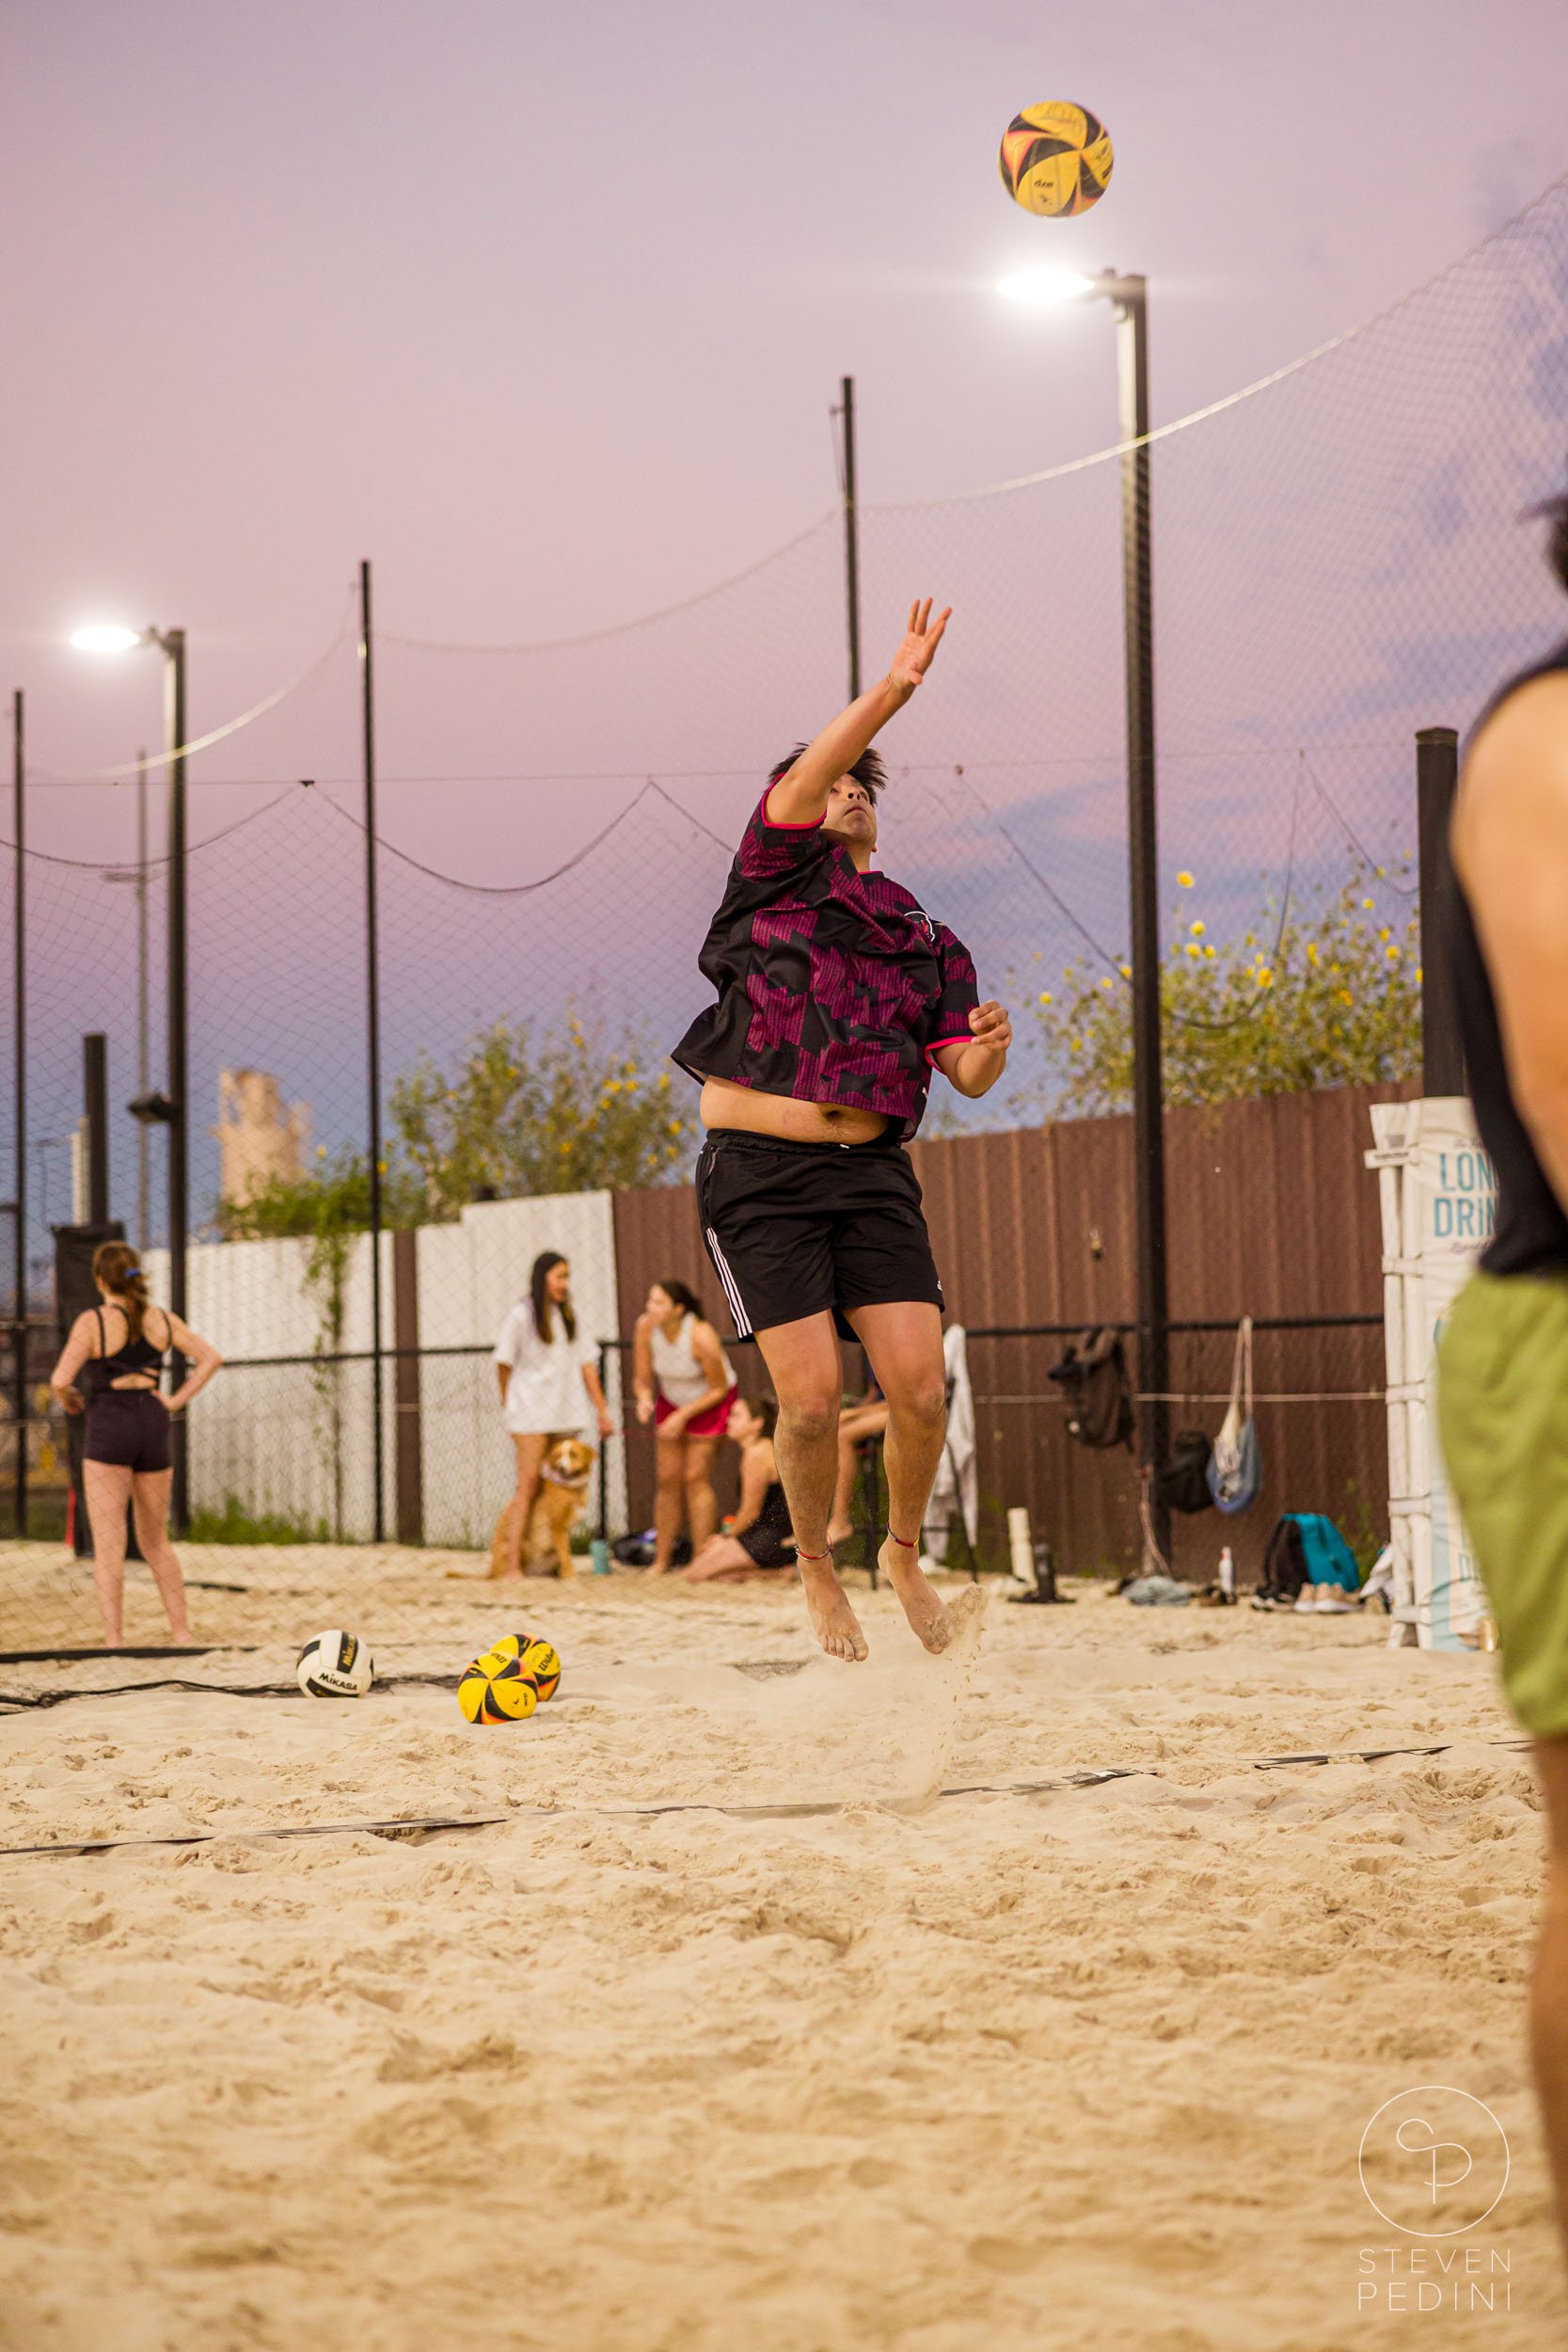 Steven Pedini Photography - Bumpy Pickle - Sand Volleyball - Houston TX - World Cup of Volleyball - 00285.jpg